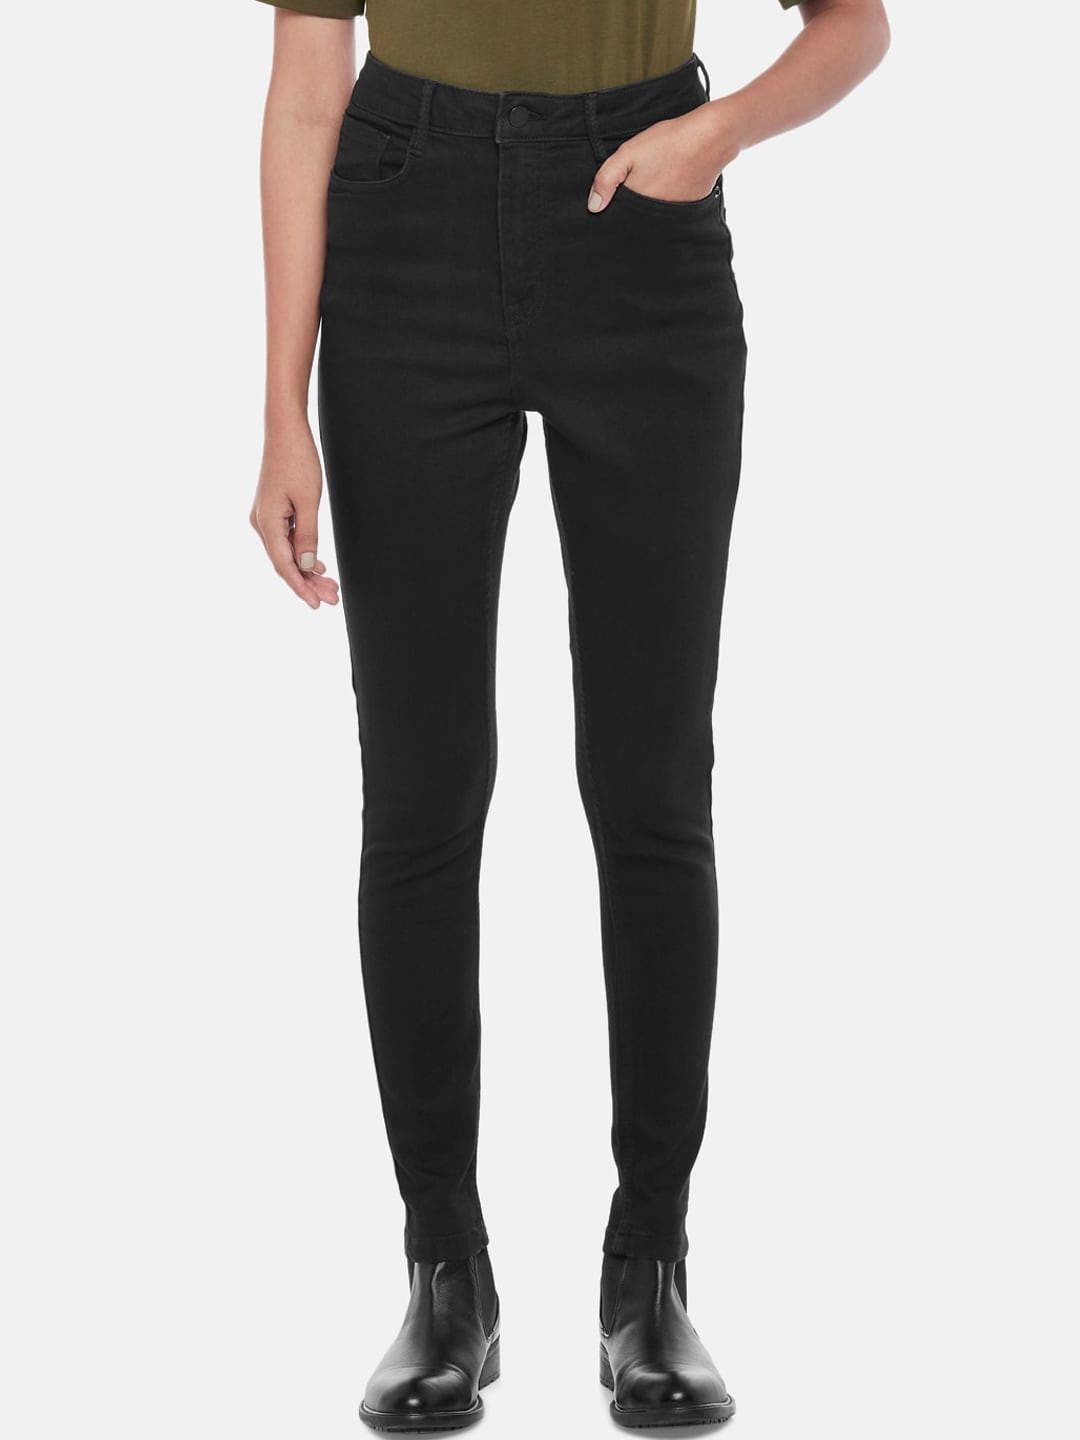 SF JEANS by Pantaloons Women Black Skinny Fit High-Rise Jeans Price in India